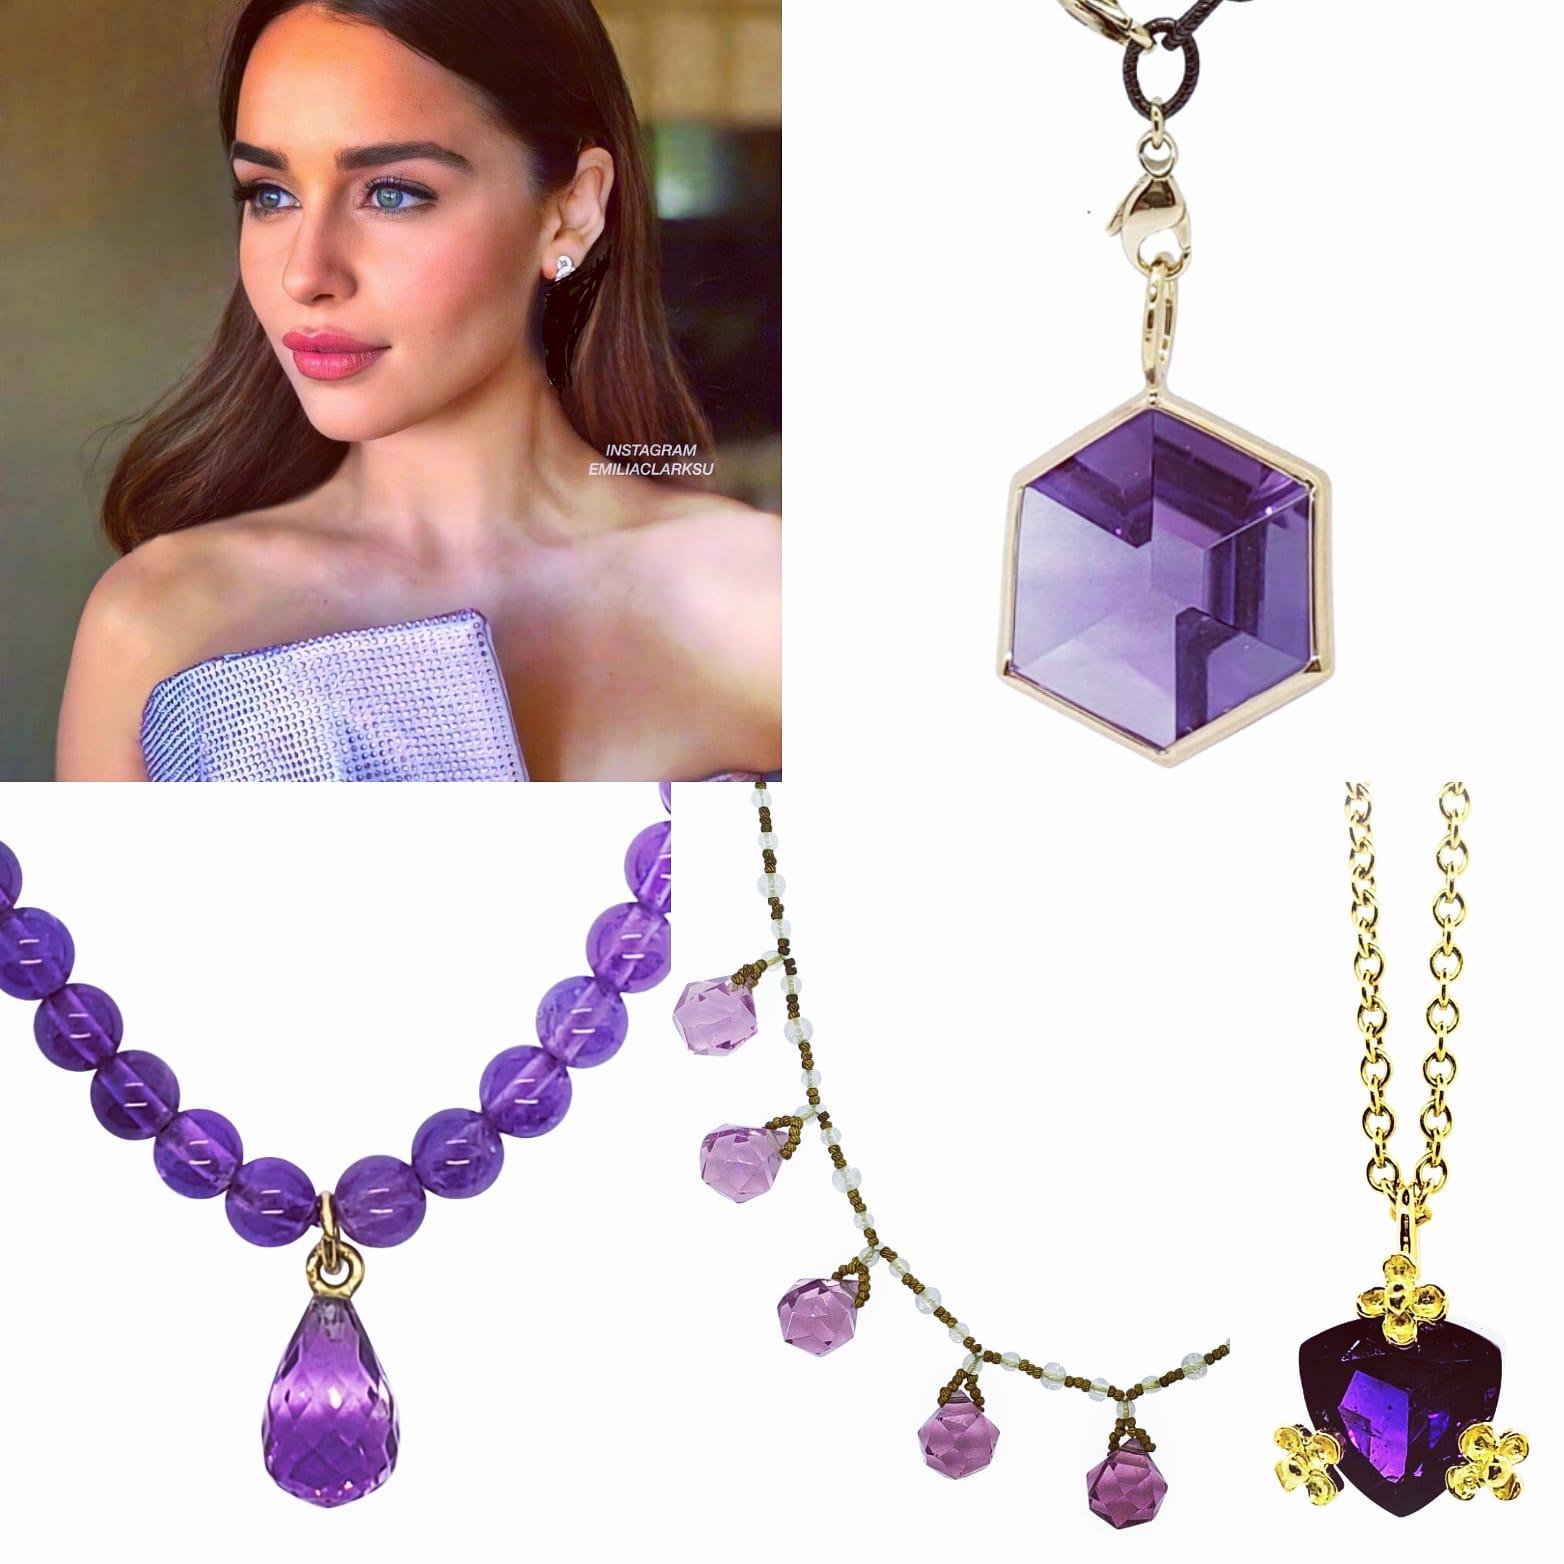 Amethyst, the Birthstone of February, is a magical and regal color. This elegant 4mm round smooth beads with a center Amethyst briolette cut pear drop is a showstopper. Simplicity with subtlety, casual yet dressy, a Necklace with a sea of purple has